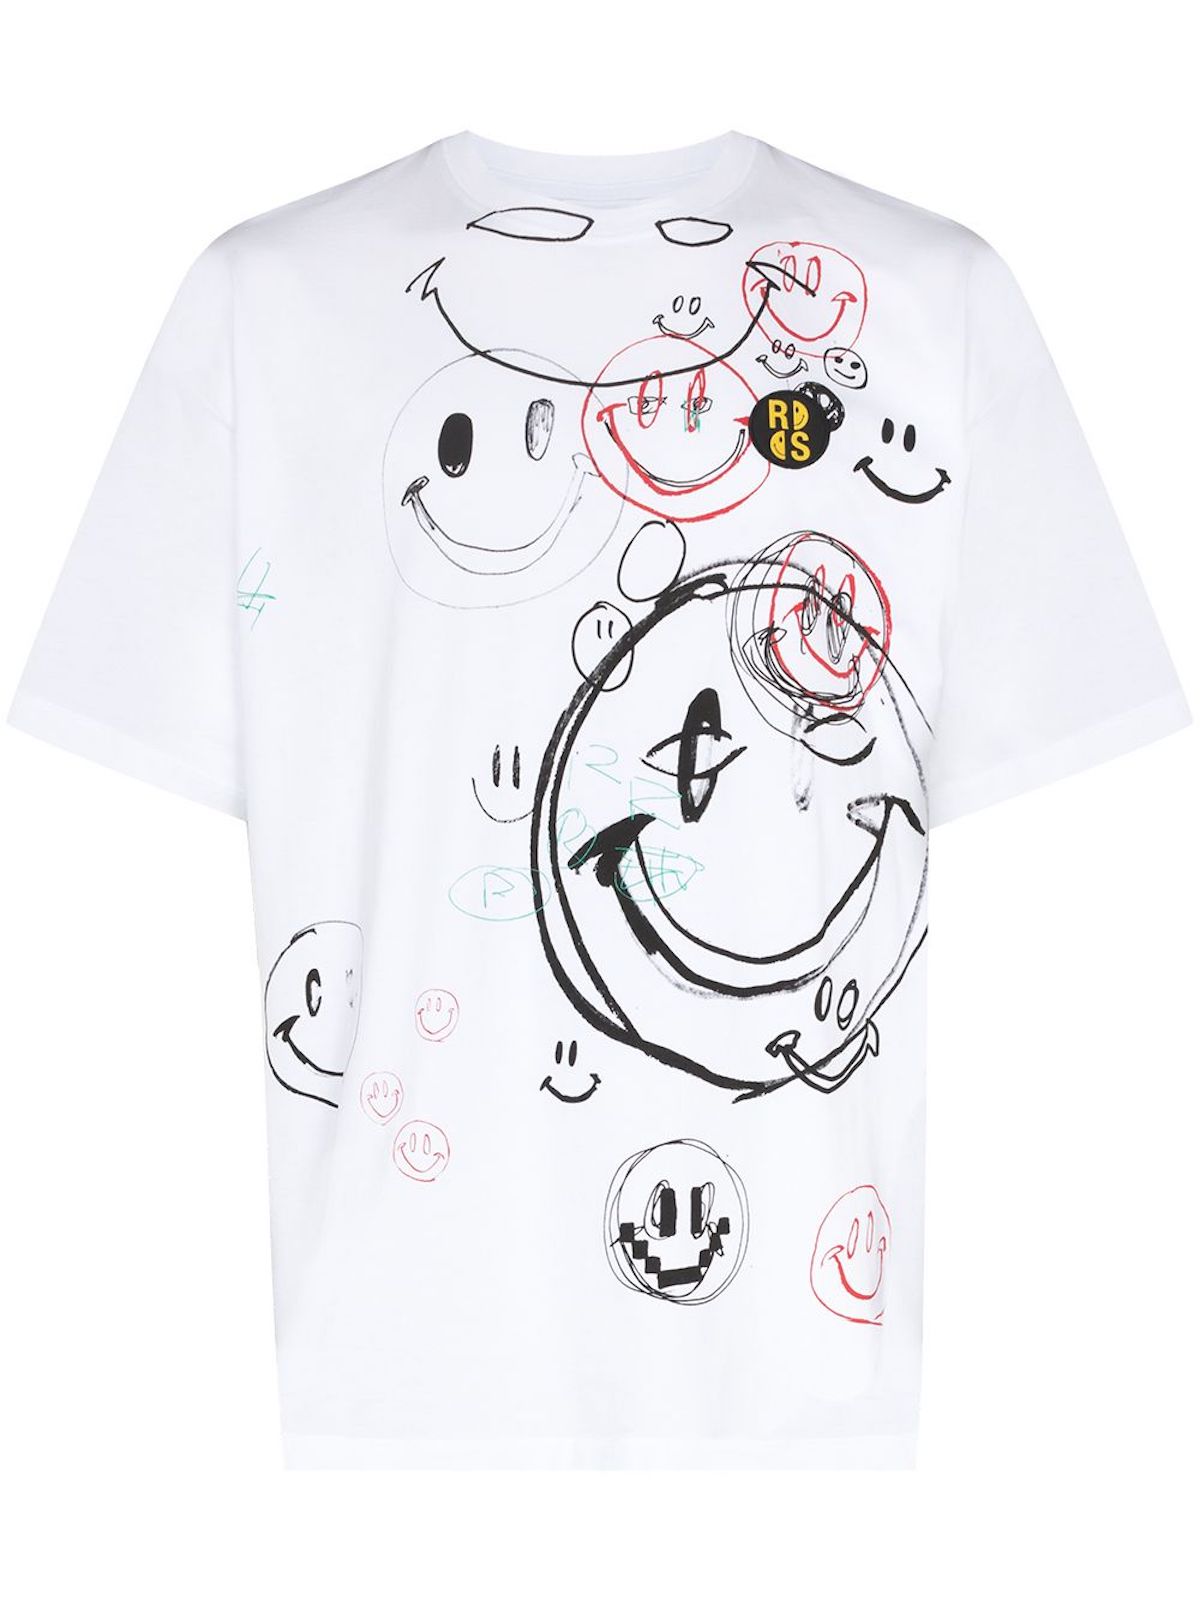 Raf Simons & Smiley Come Together For New Capsule – PAUSE Online | Men ...